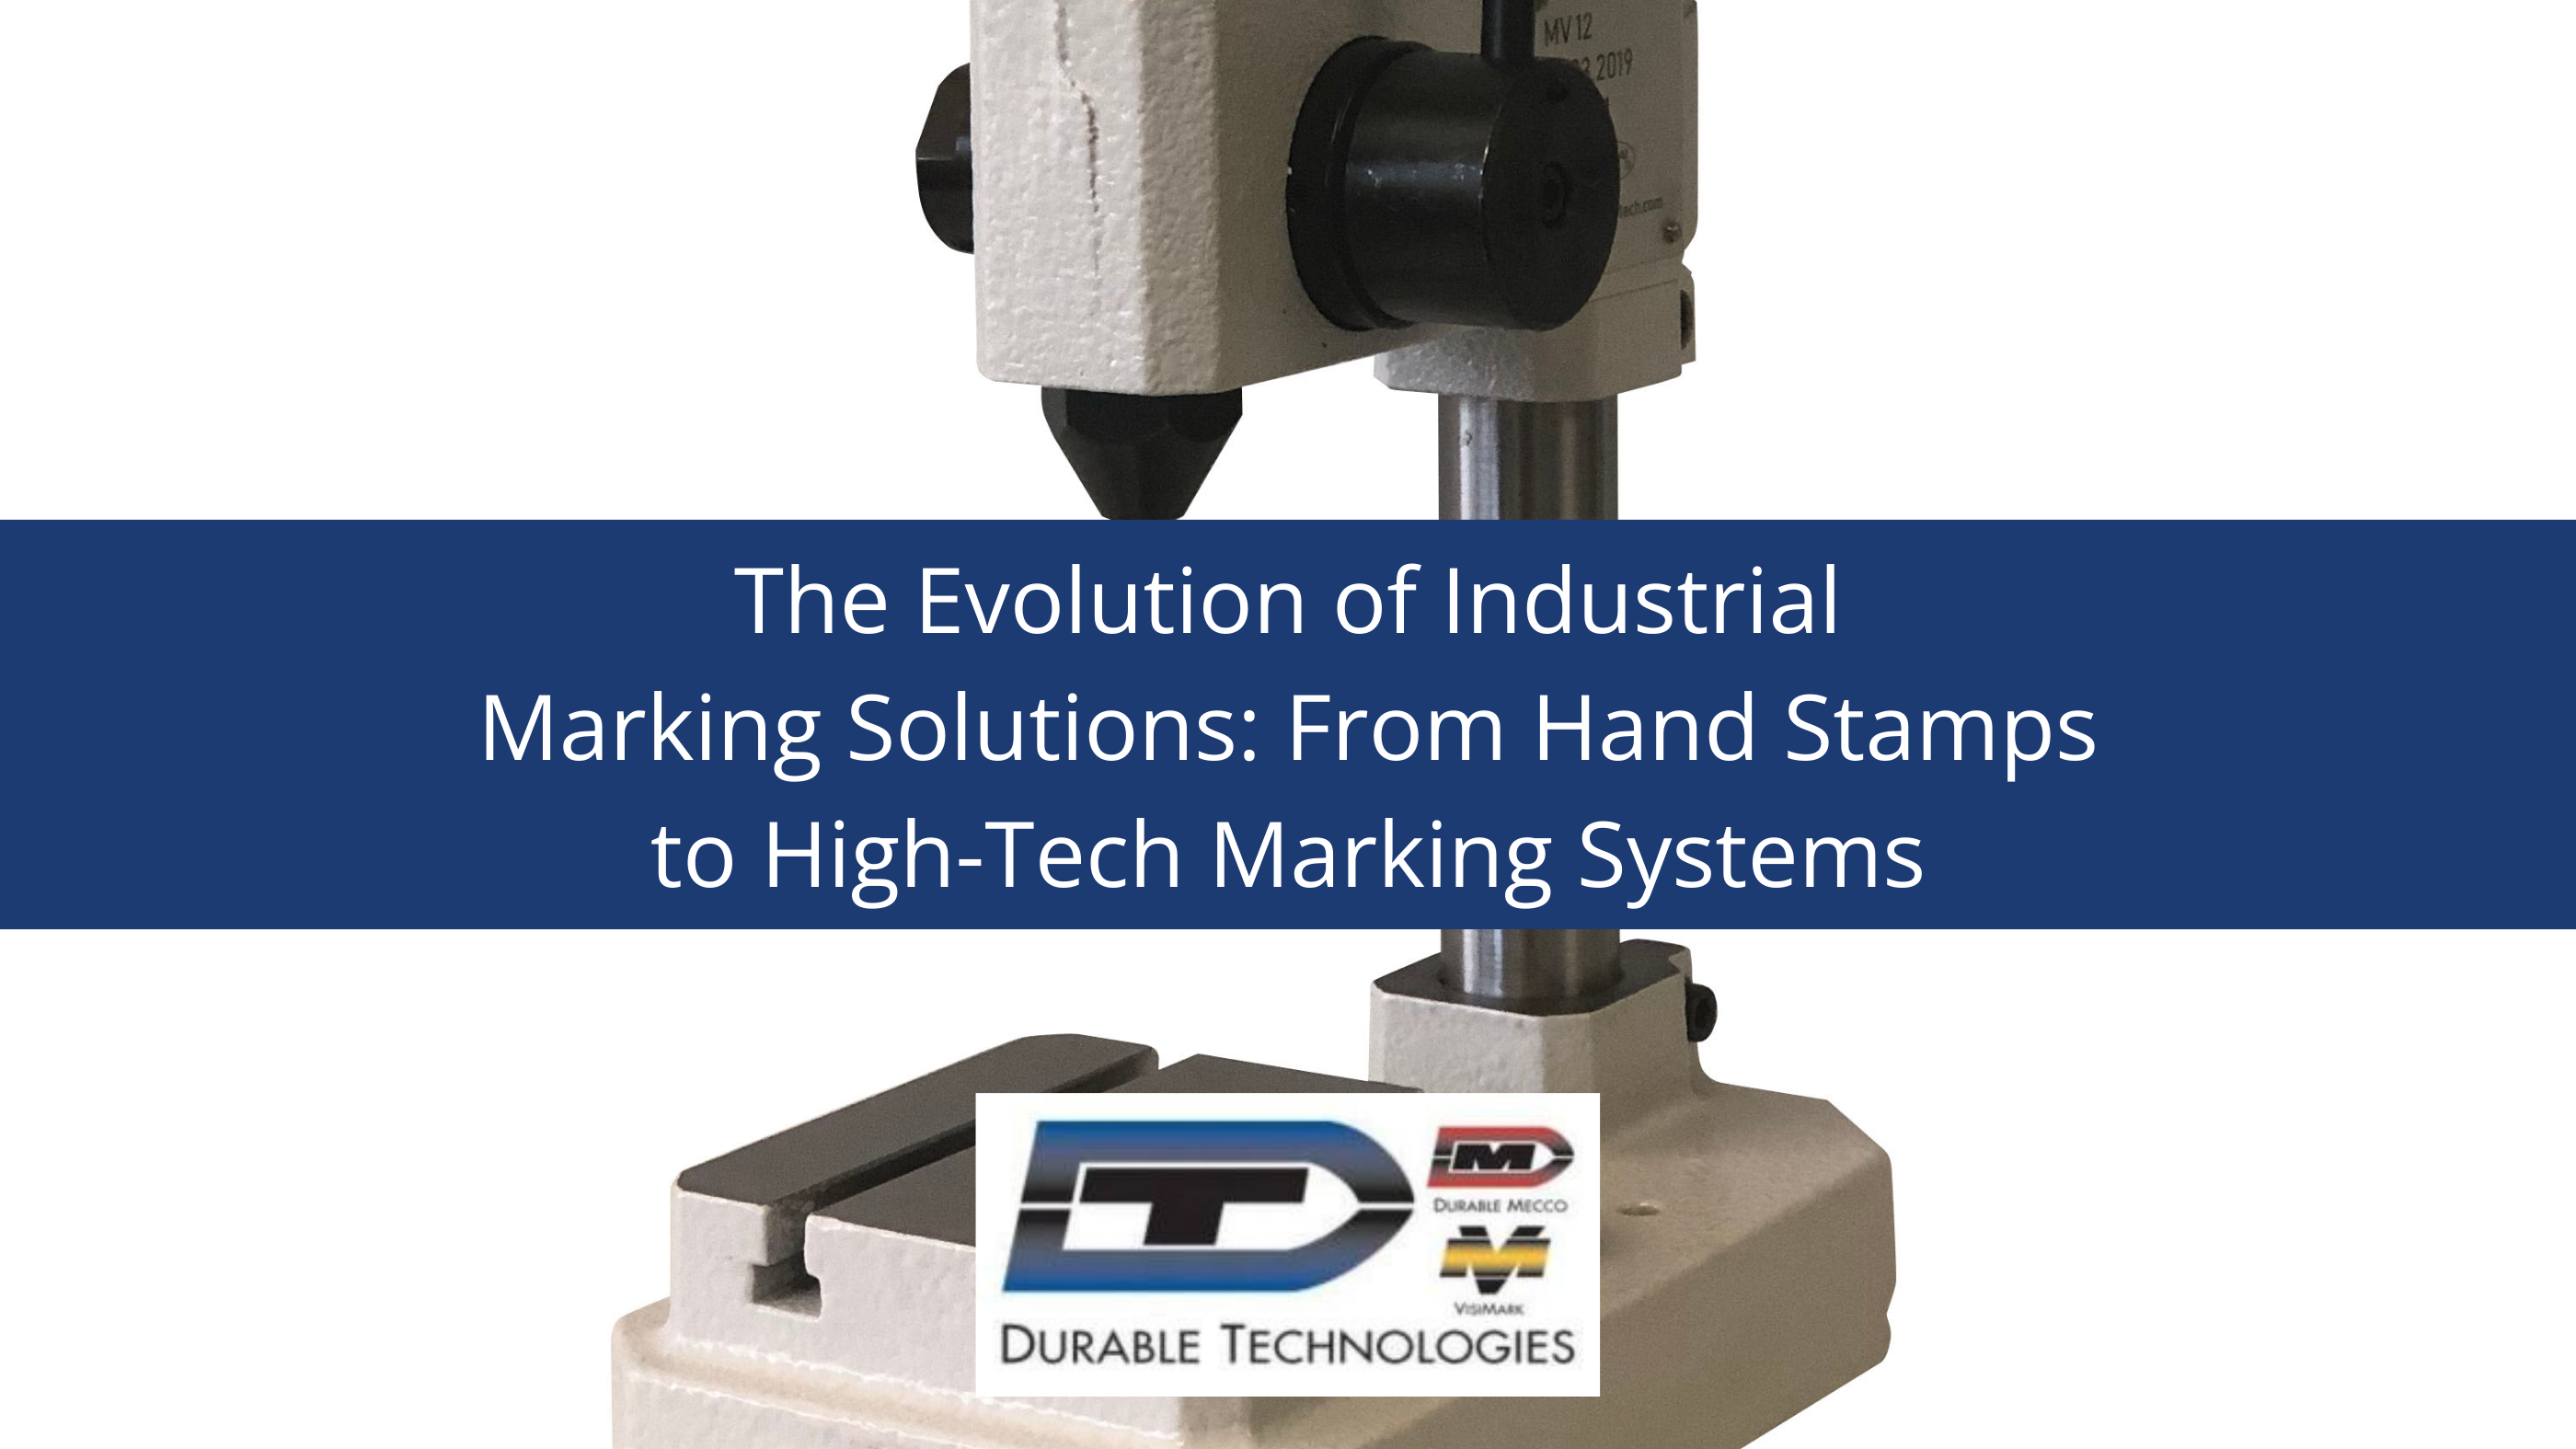 The Evolution of Industrial Marking Solutions: From Hand Stamps to High-Tech Marking Systems